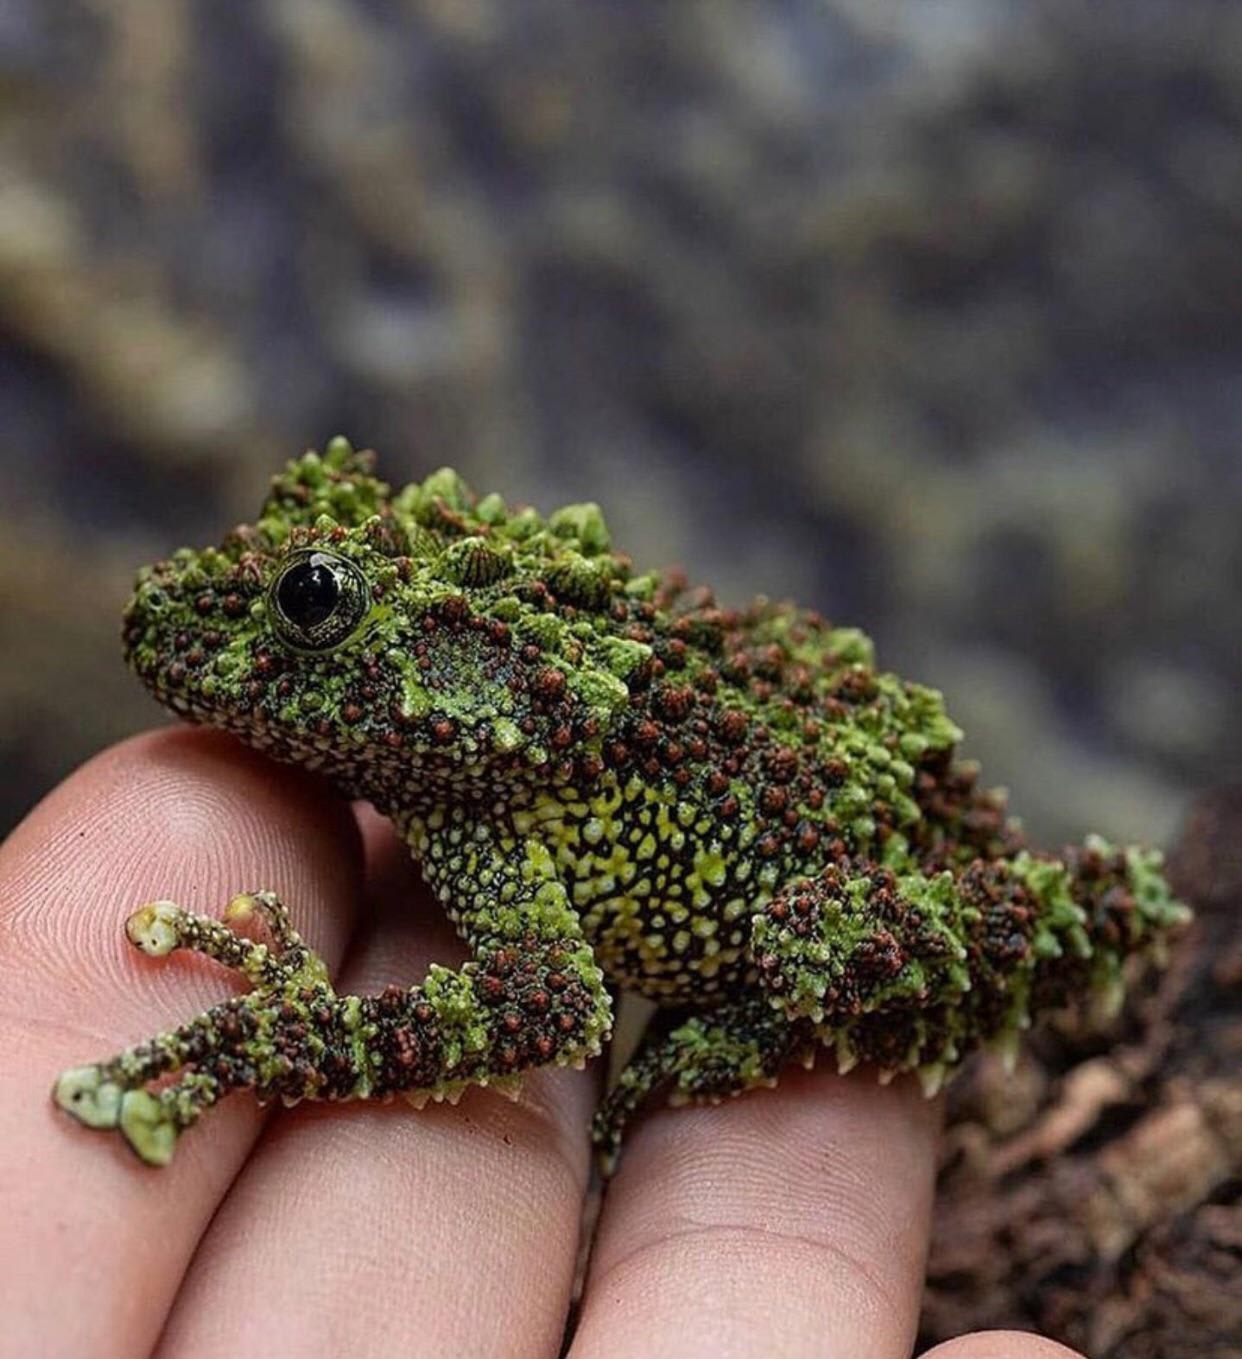 A Vietnamese Mossy frog